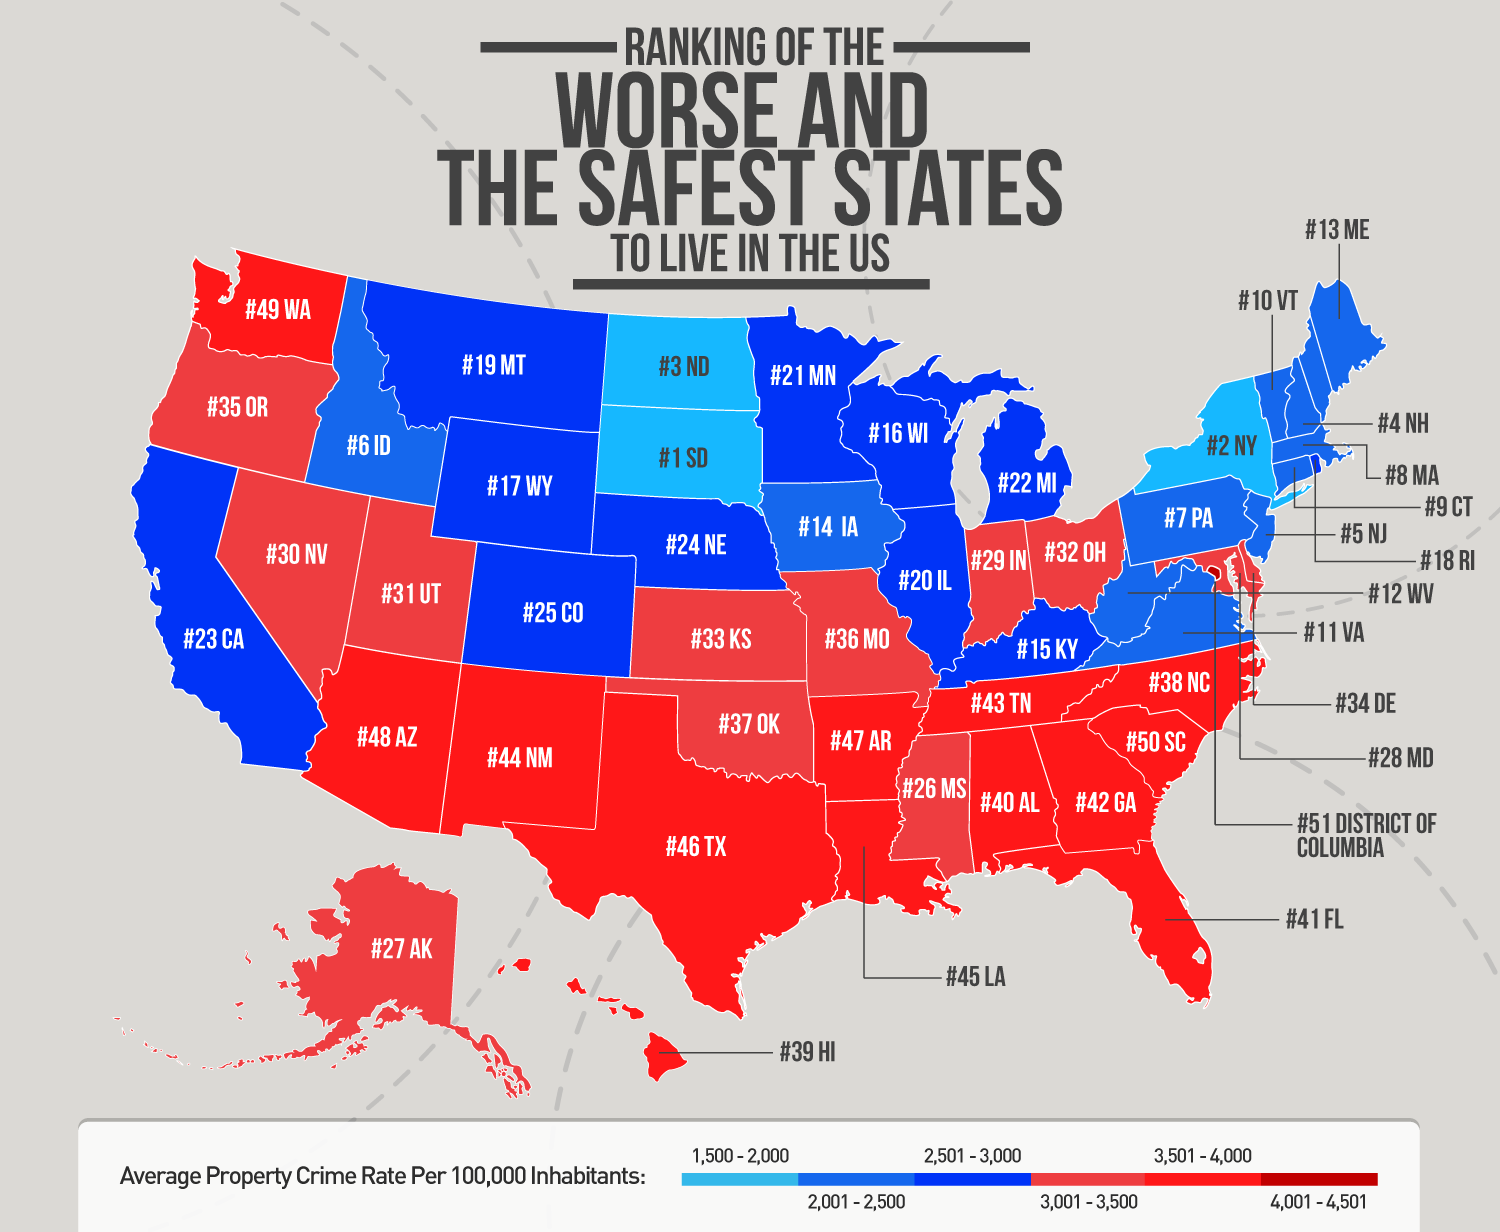 Ranking of the worse and the safest states to live in the U.S. Vivid Maps